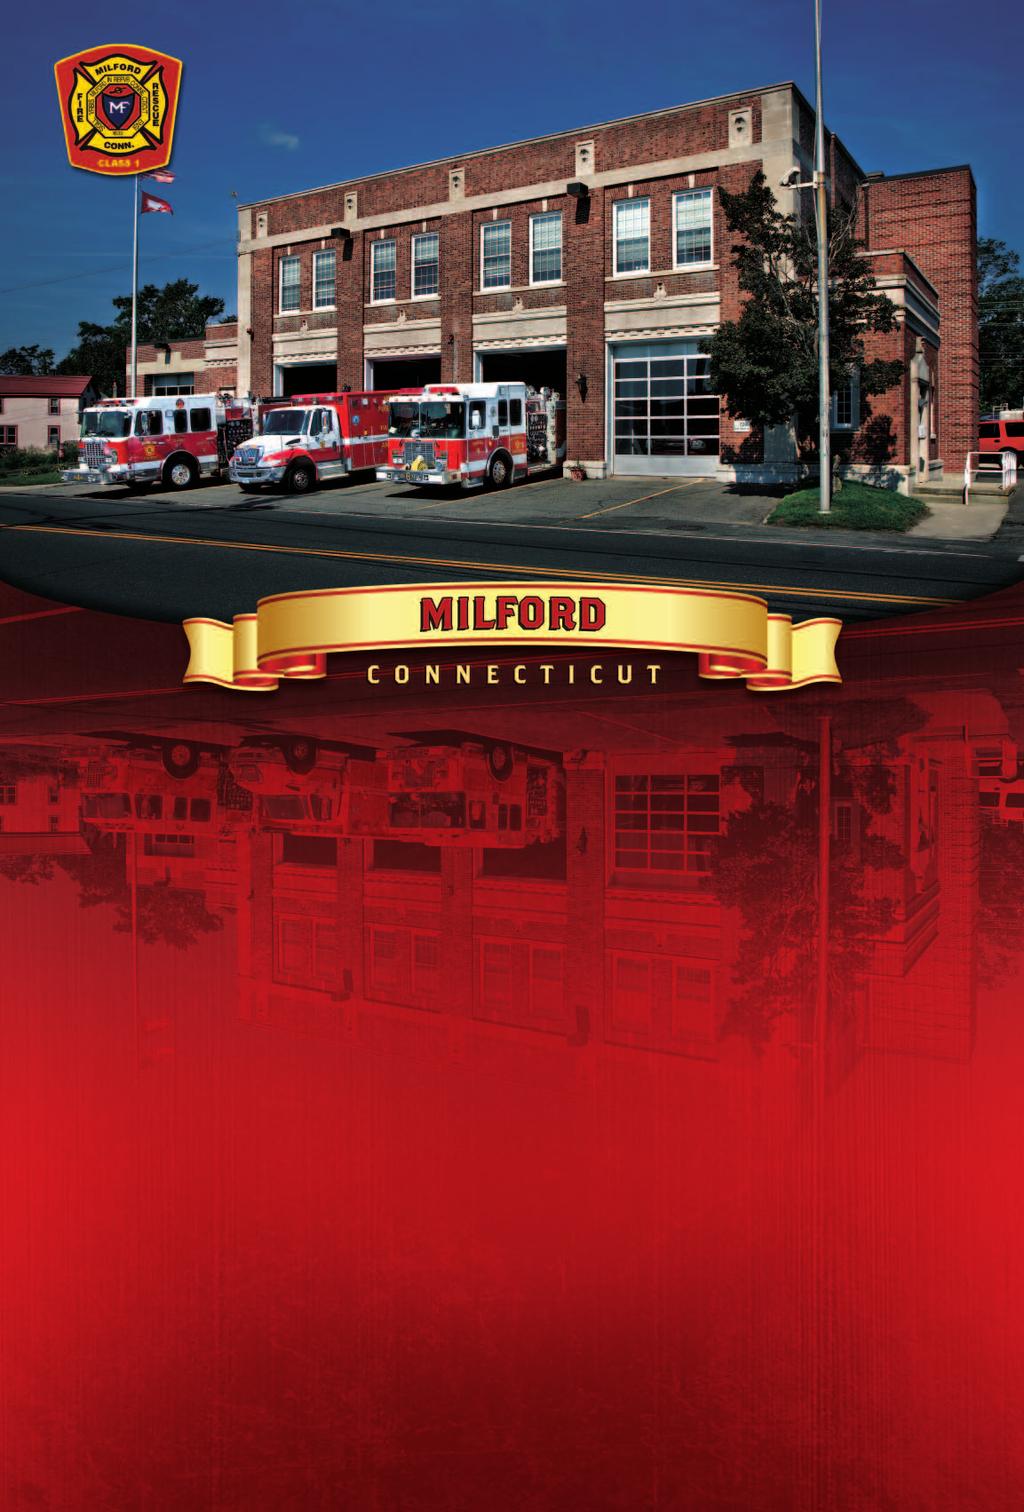 Milford Fire Department Proudly Serving the Milford Community Since 1838 MAY 1 2 3 4 5 6 Full Moon 7 8 9 10 11 12 Last Quarter Moon 13 Mother s Day 14 15 16 17 18 19 20 New Moon 21 Victoria Day